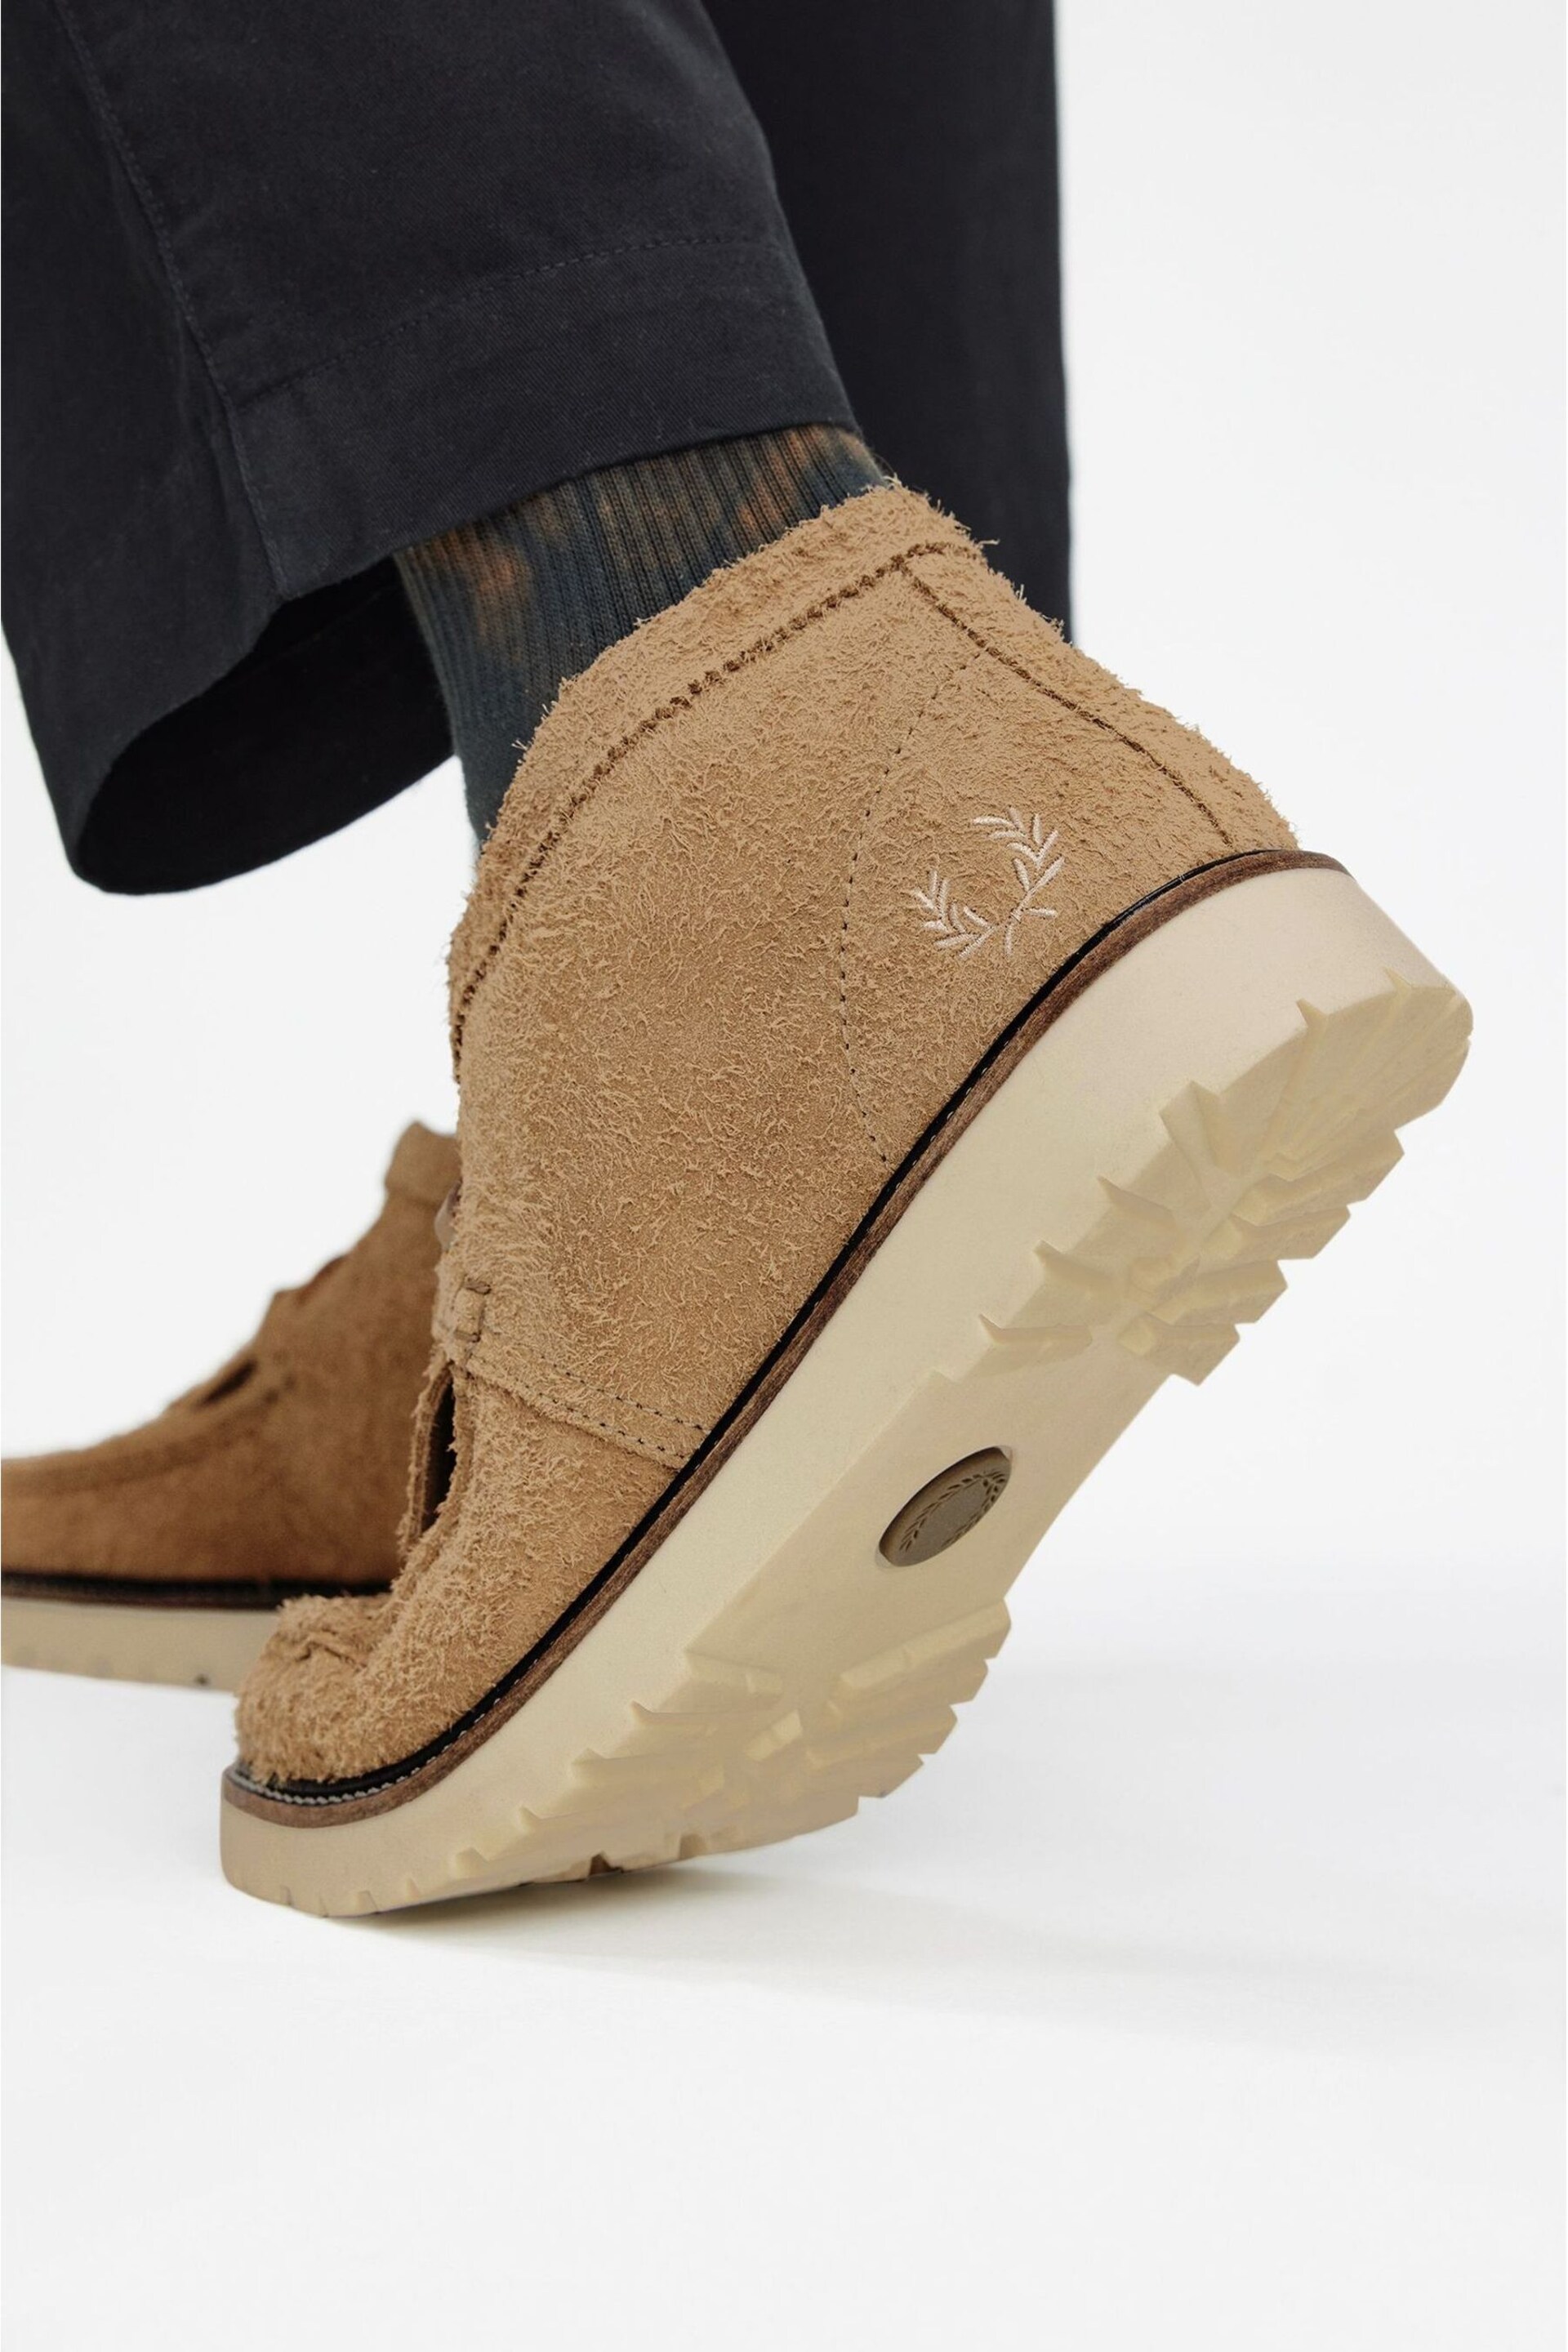 Fred Perry Stone Kenny Boots - Image 9 of 9